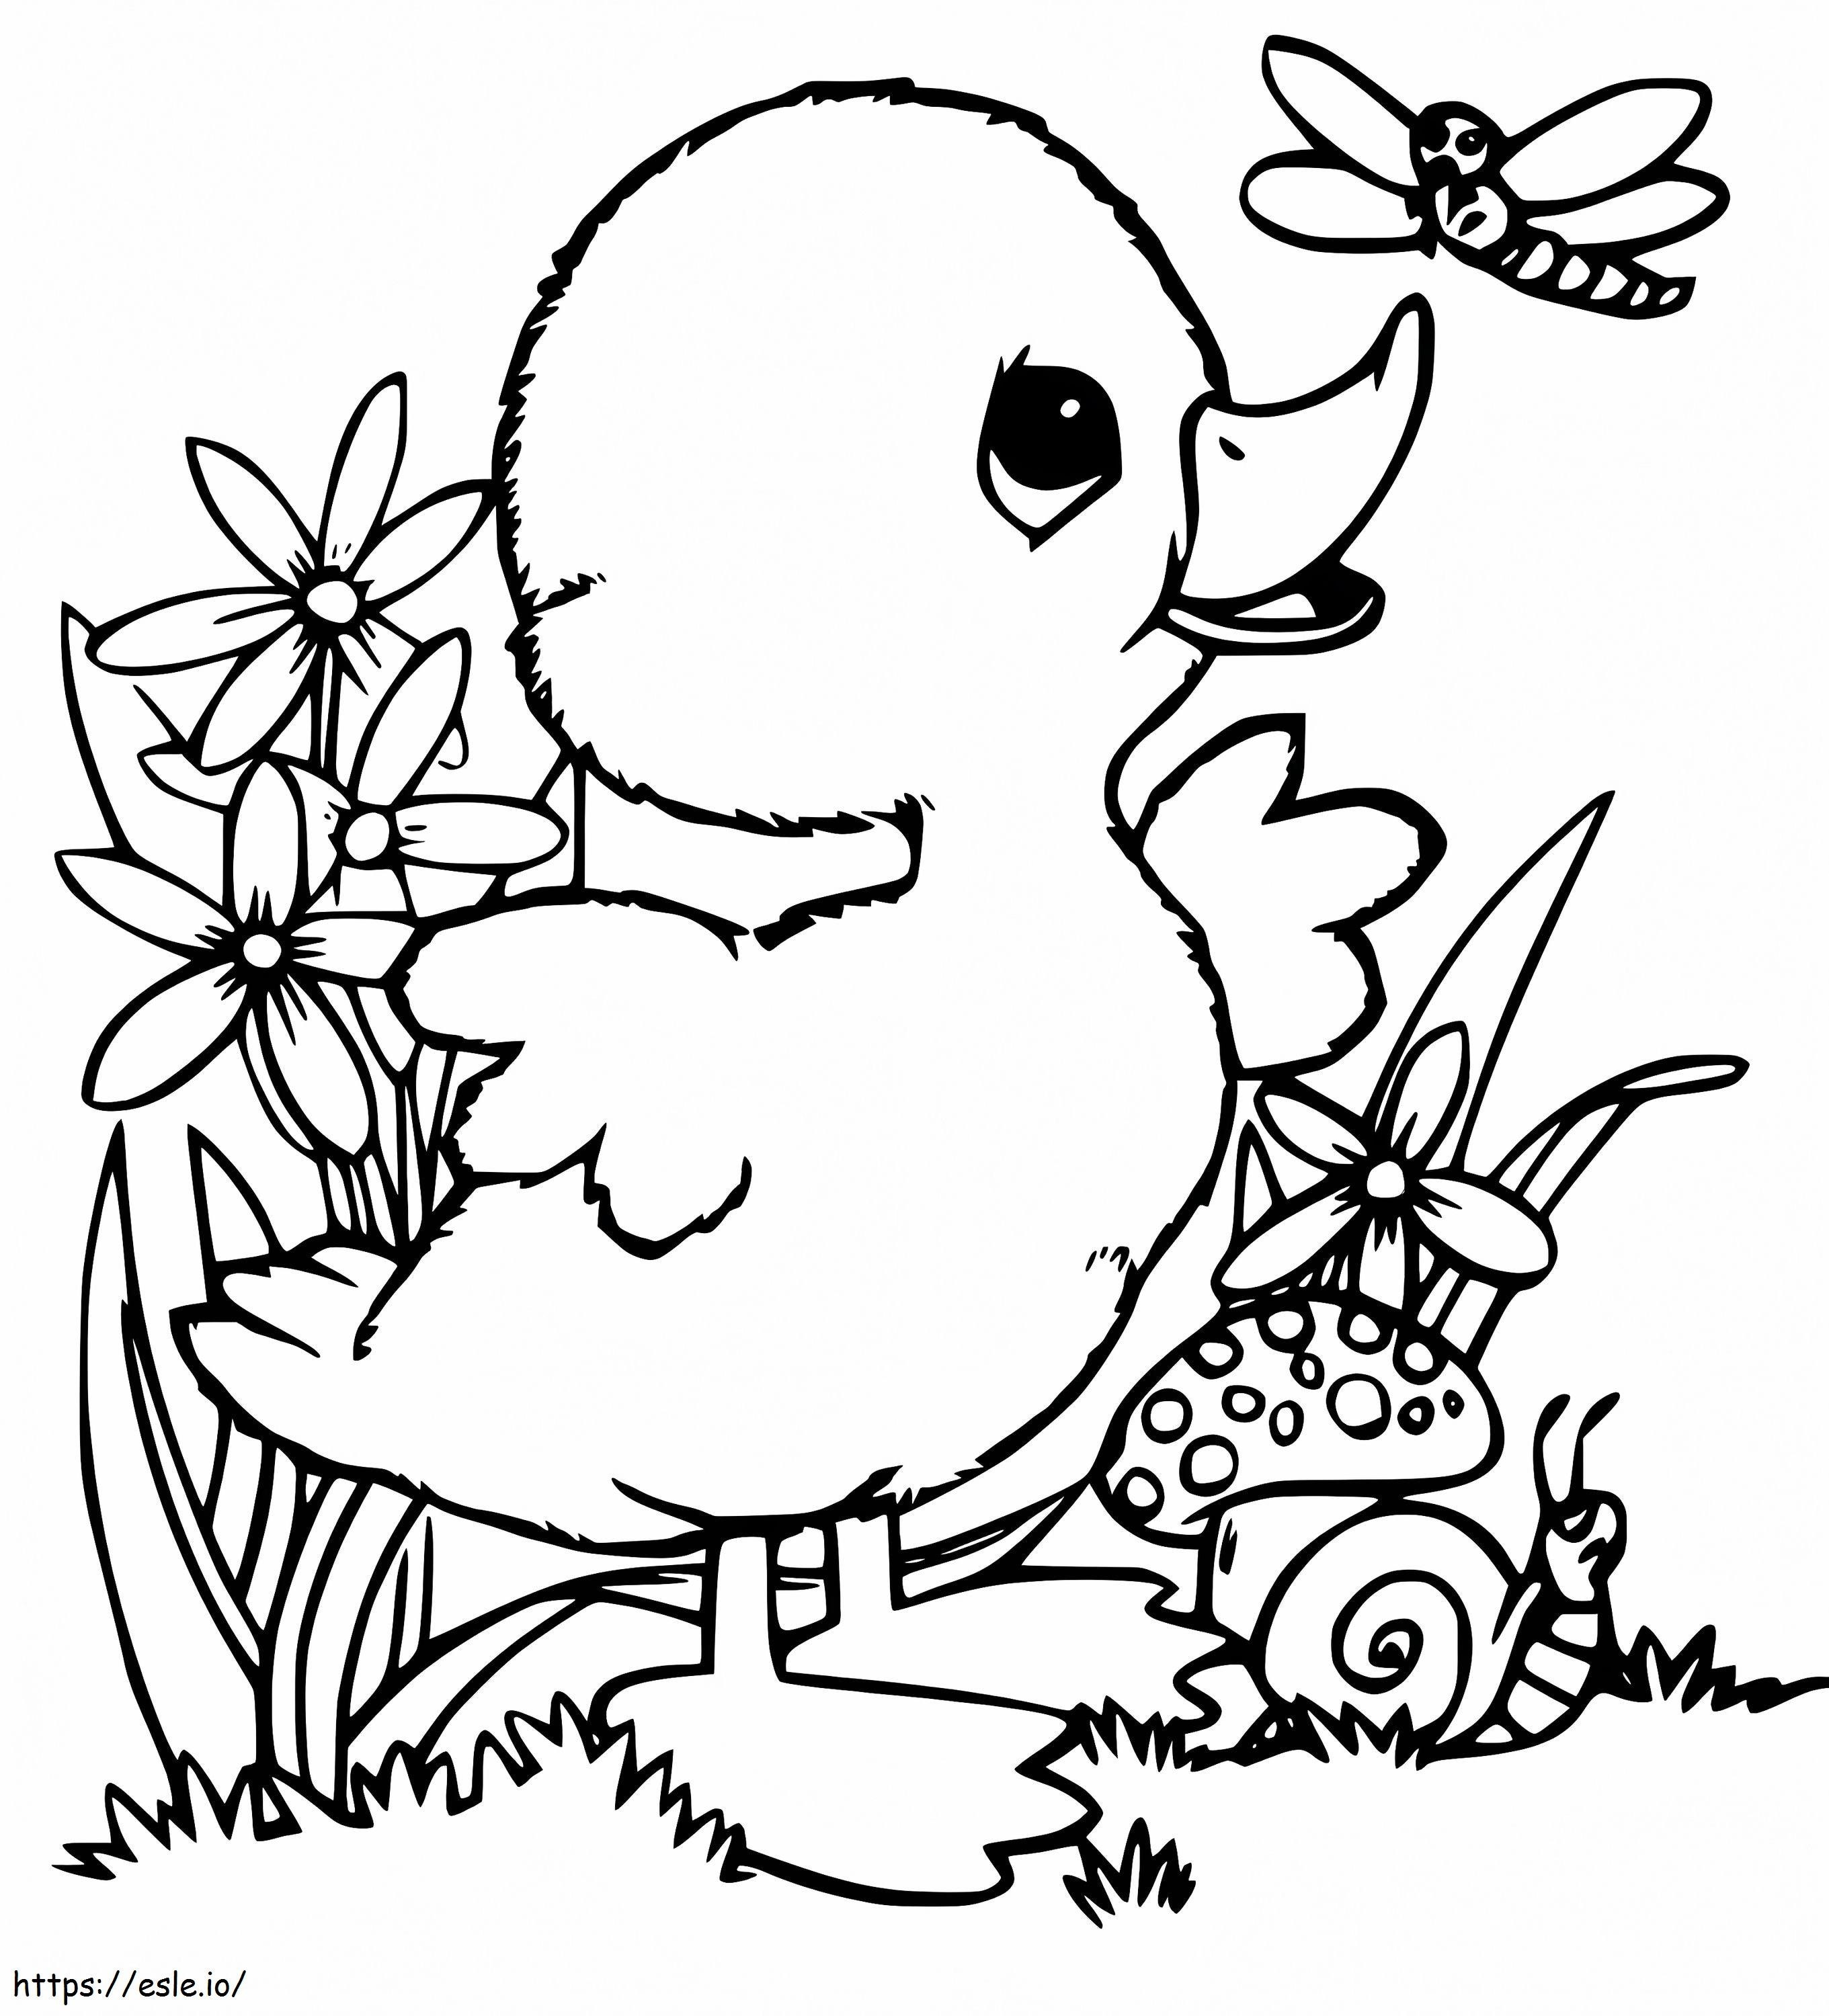 Dragonfly And Duckling coloring page